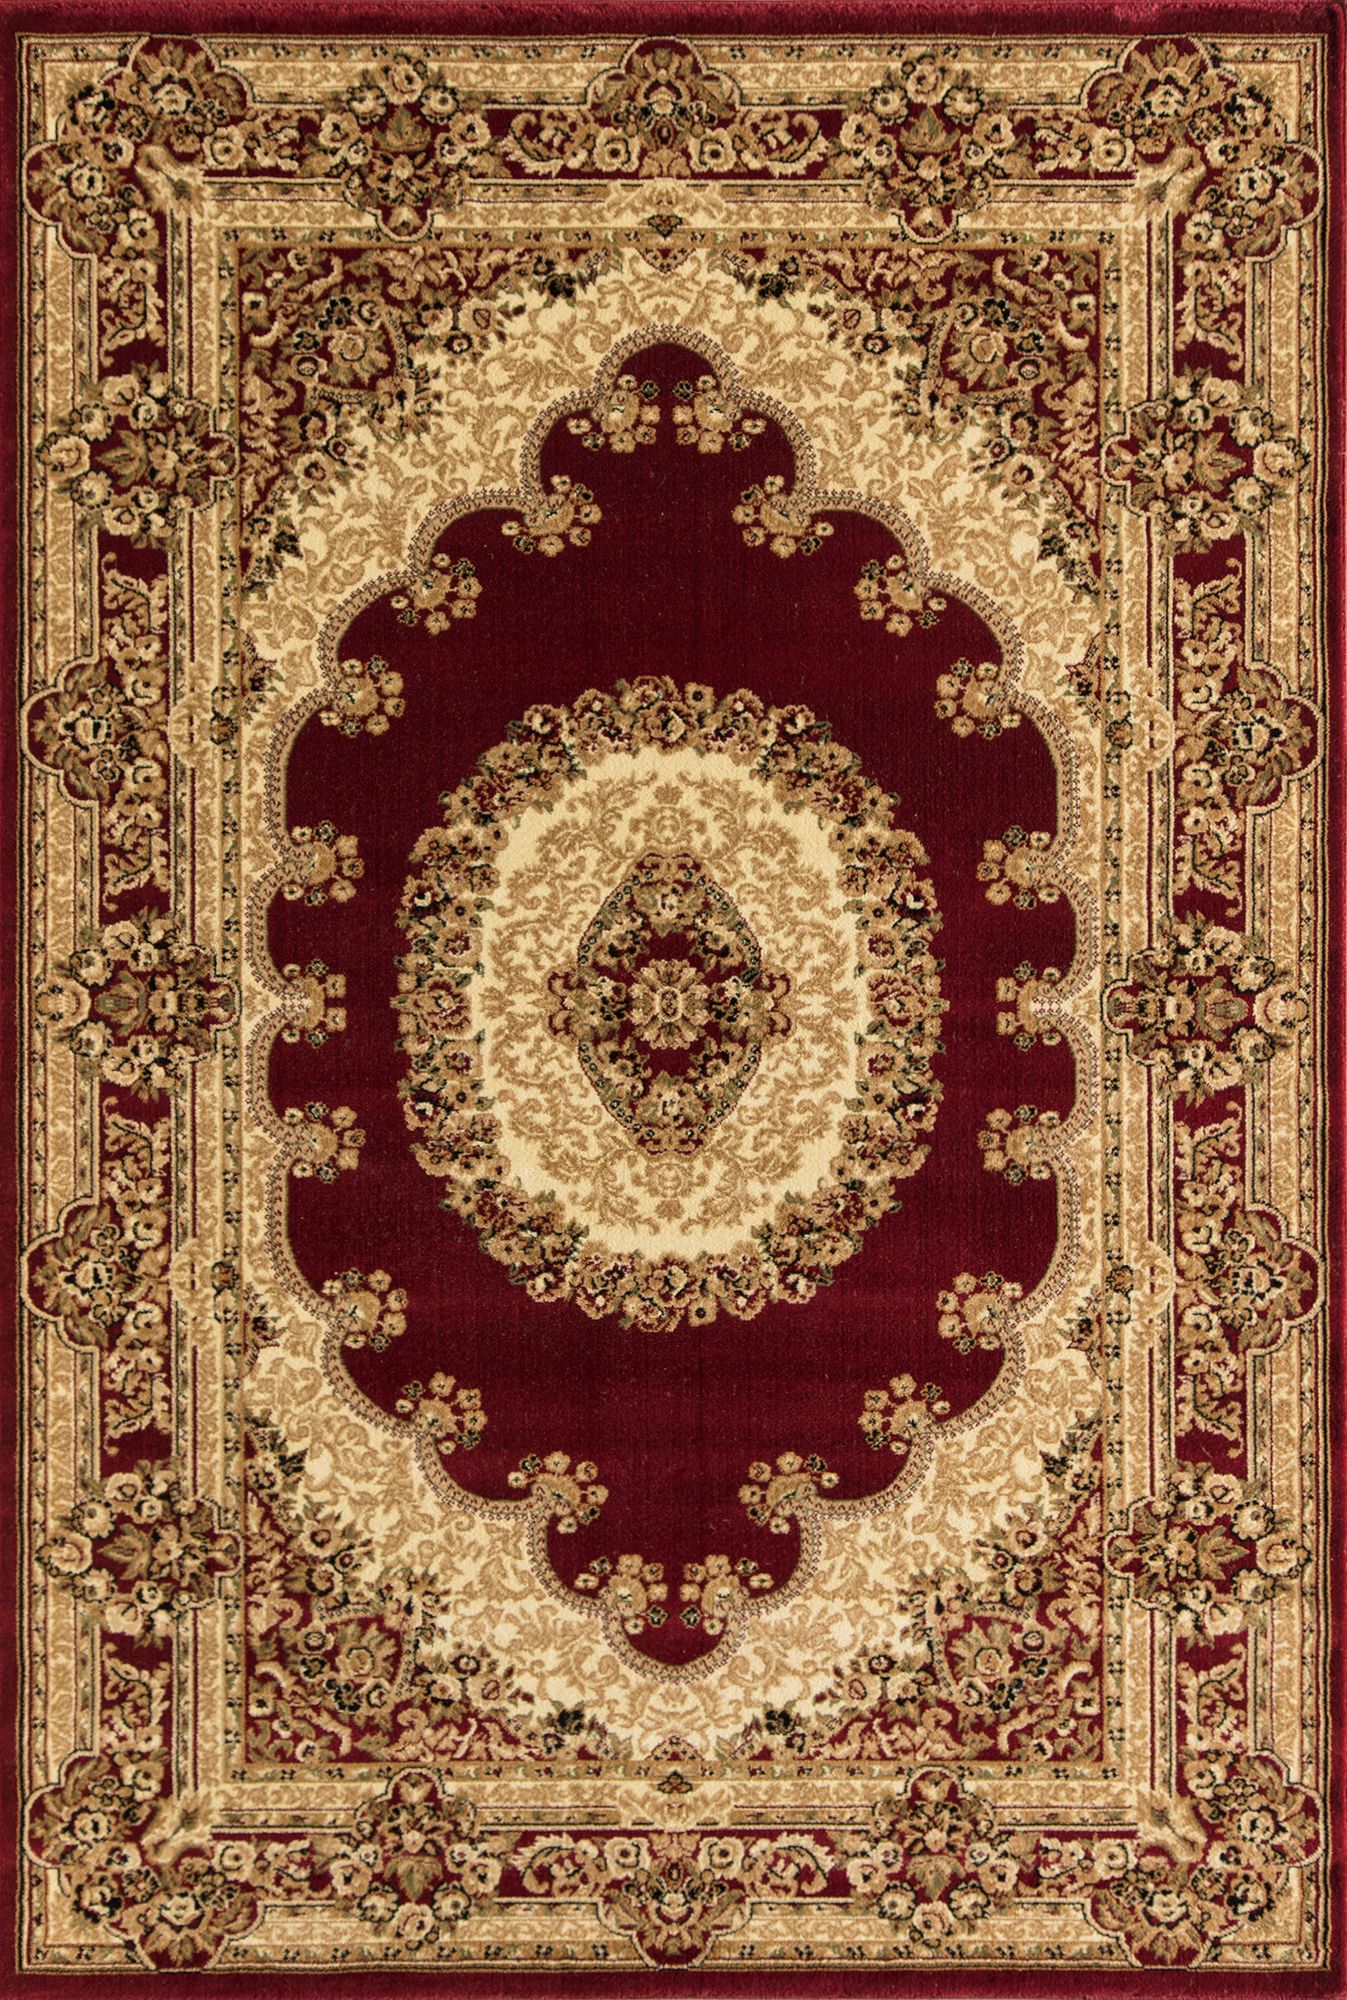 Rugs America Vista 807-RED Kerman Red Oriental Traditional Red Area Rug, 5'3"x7'10" - image 4 of 5